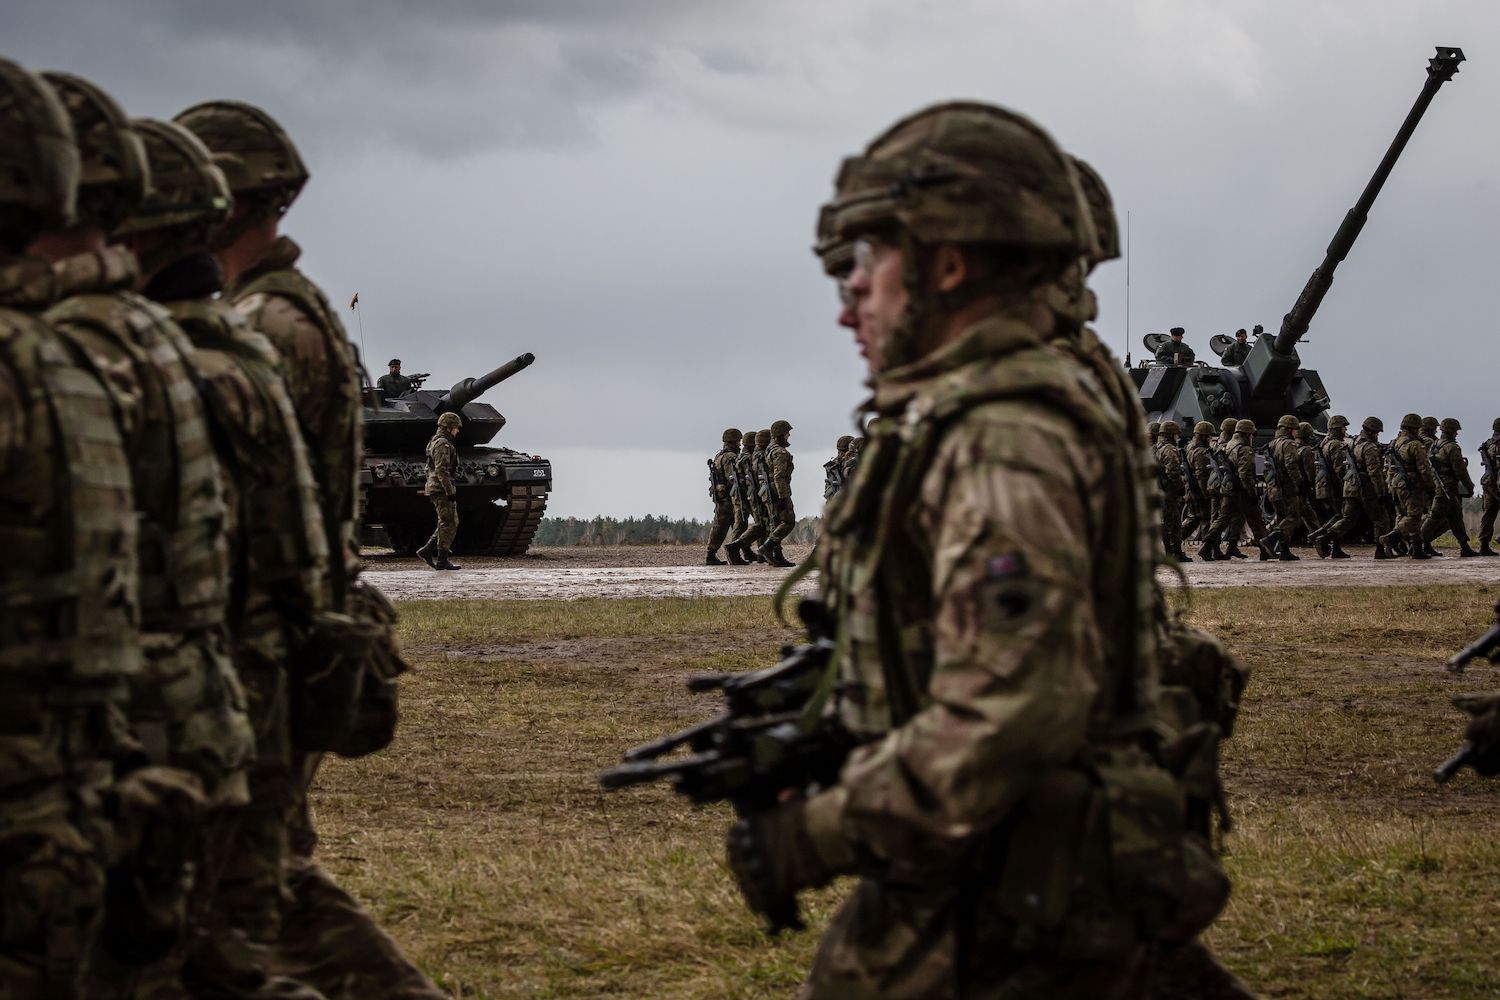 US troops marching in NATO welcome ceremony in Orzysz, Poland on April 13, 2017.